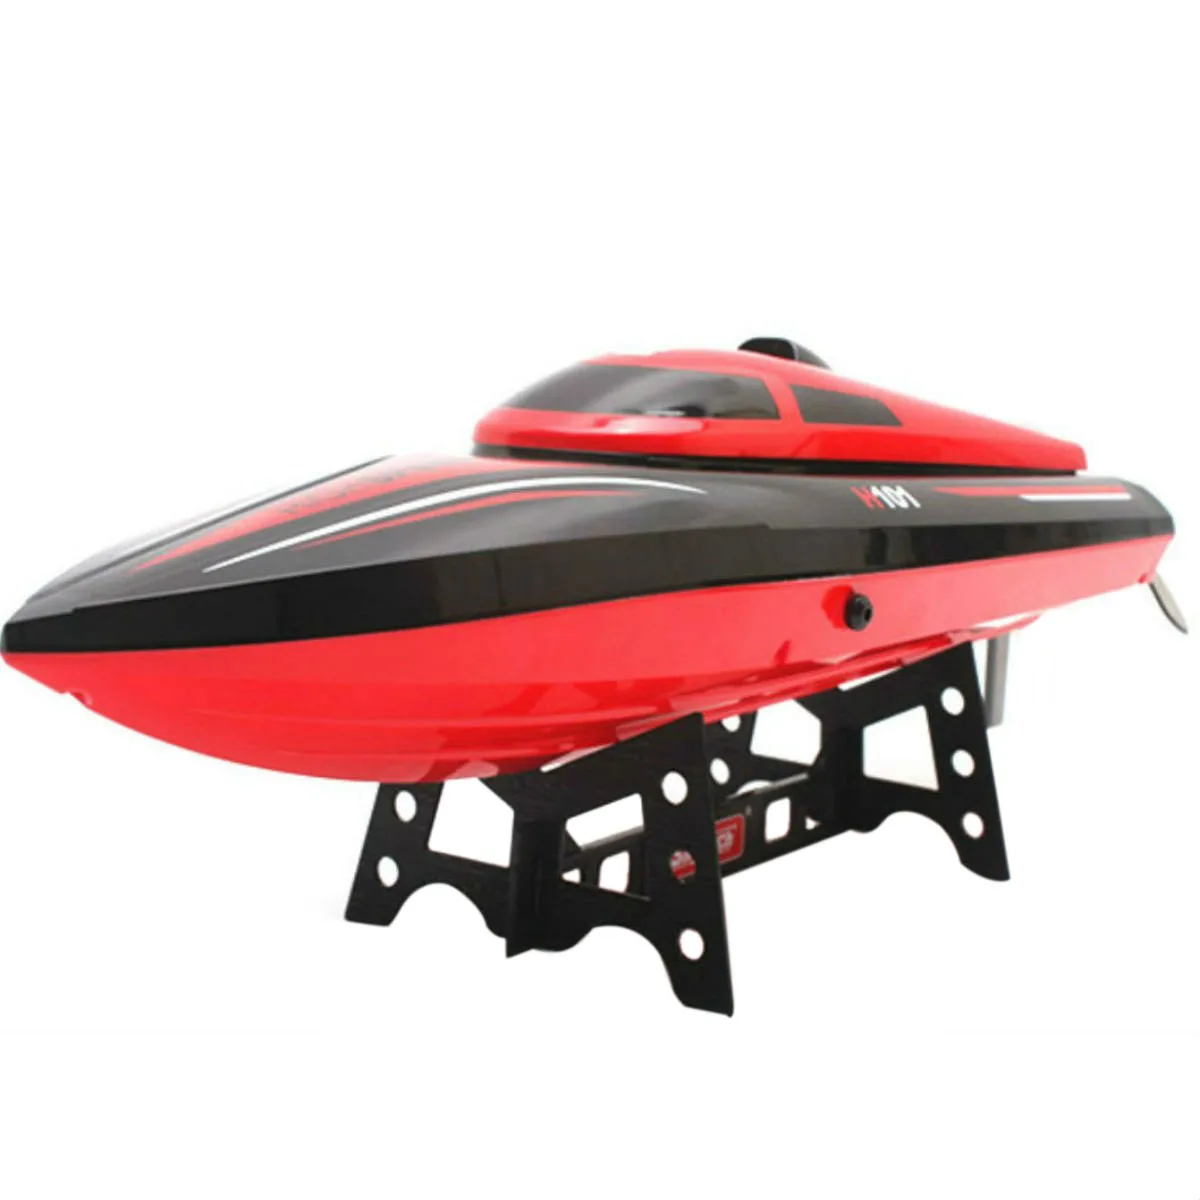 

Skytech H101 2.4GHz High Speed Boat Remote Control Electric Rc Boat Modeling Ships for Pools, Lakes and Outdoor Adventure